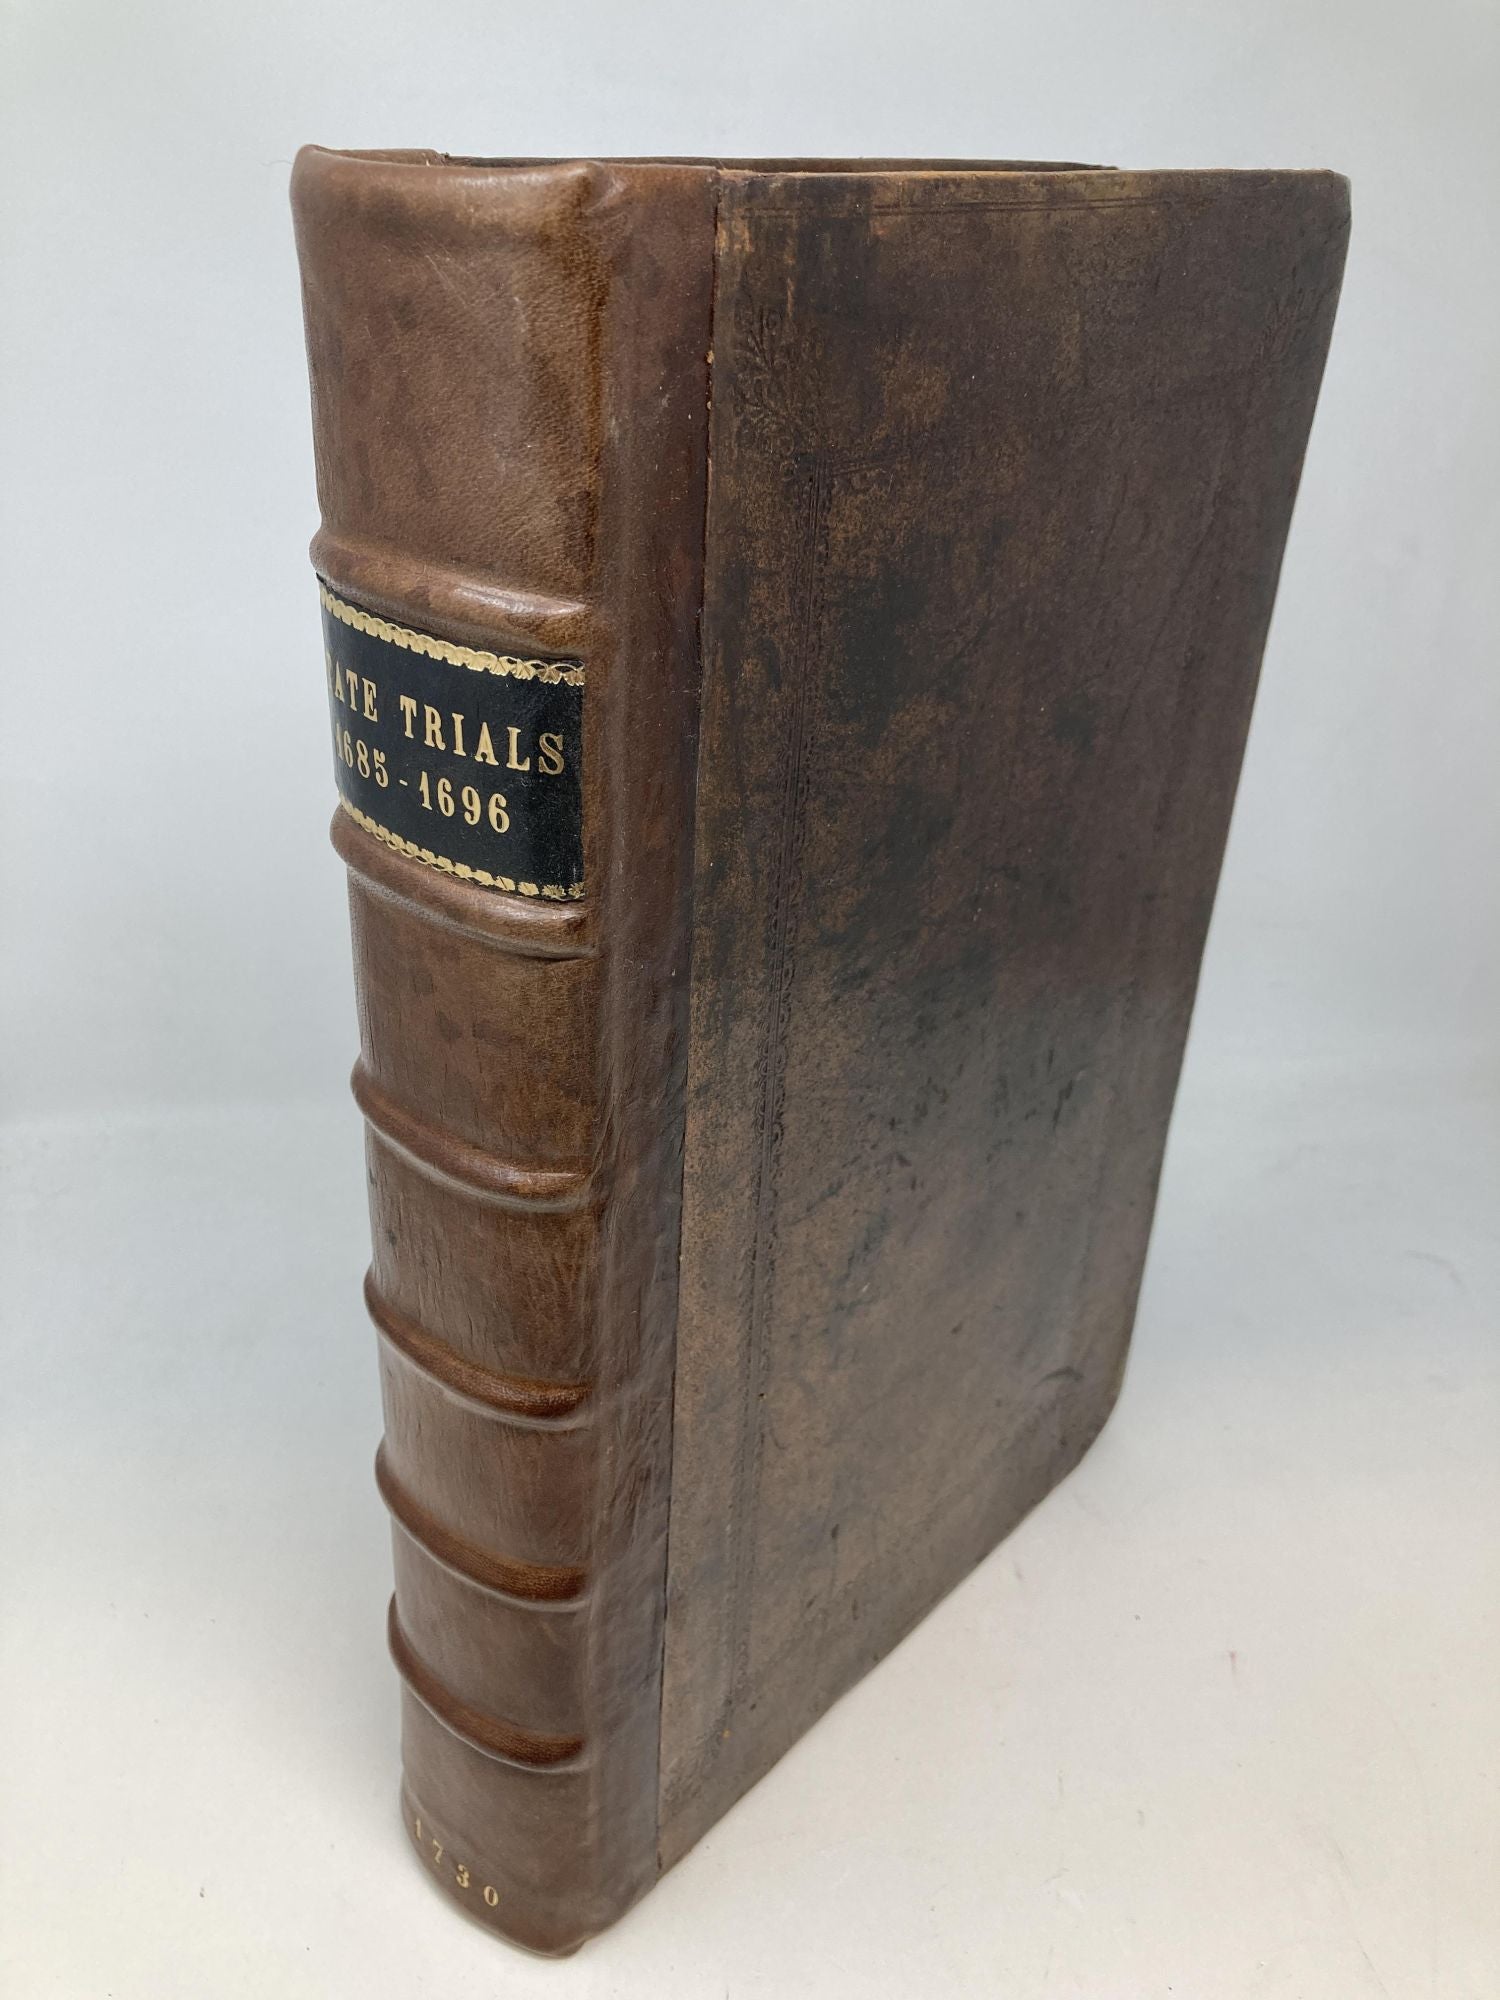 Salmon, Thomas and Sollom Emlyn - A Complete Collection of State-Trials and Proceedings Upon High-Treason, and Other Crimes and Misdemeanours; from the Reign of King Richard II. To the End of the Reign of King George I: The Fourth Volume (1685-1696); (with Two Alphabetical Tables to the Whole)